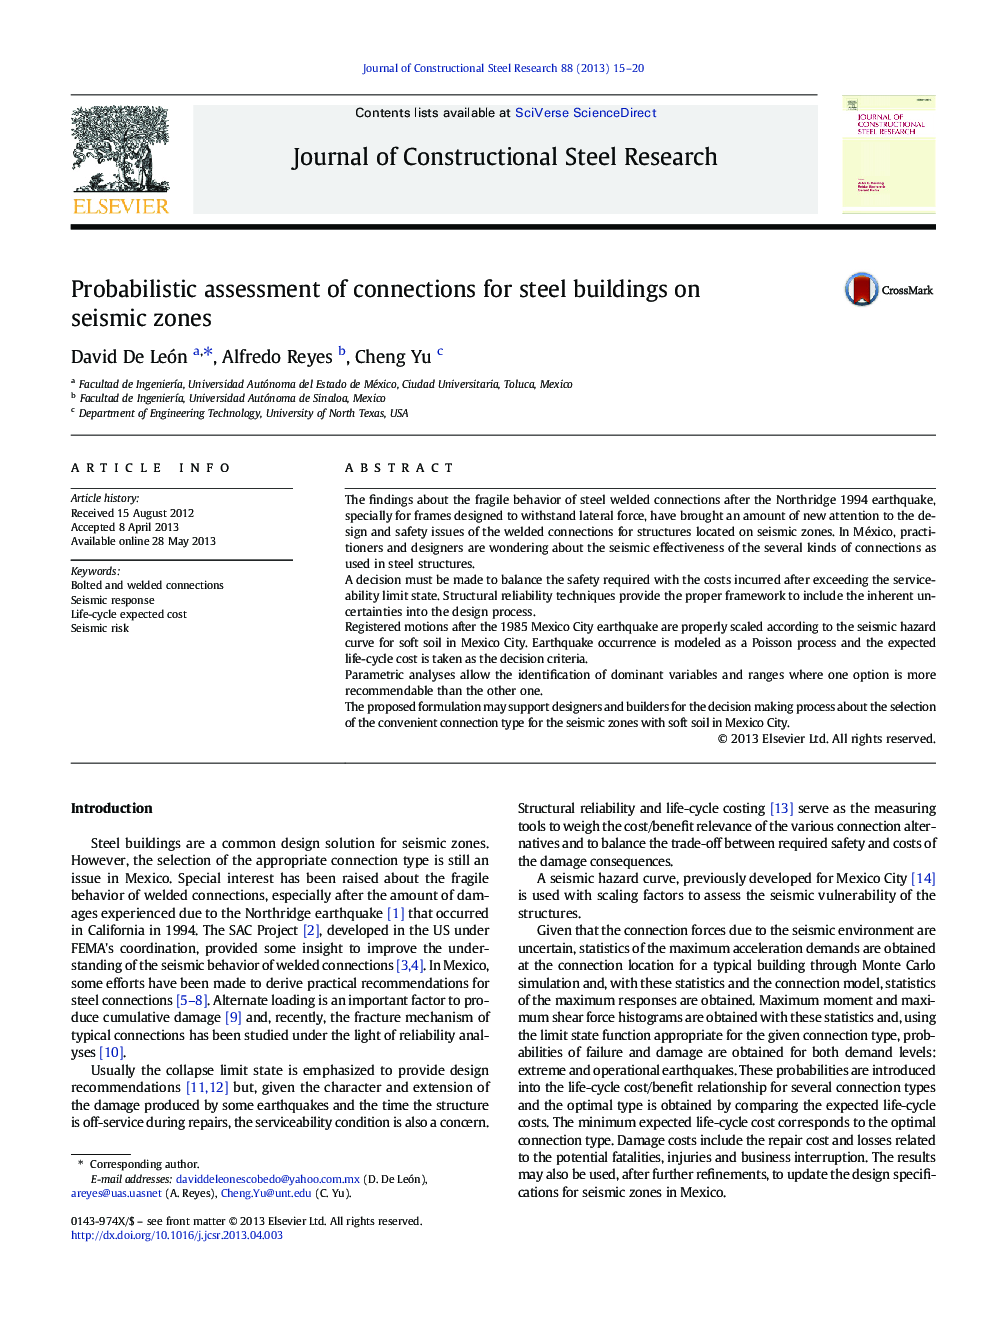 Probabilistic assessment of connections for steel buildings on seismic zones